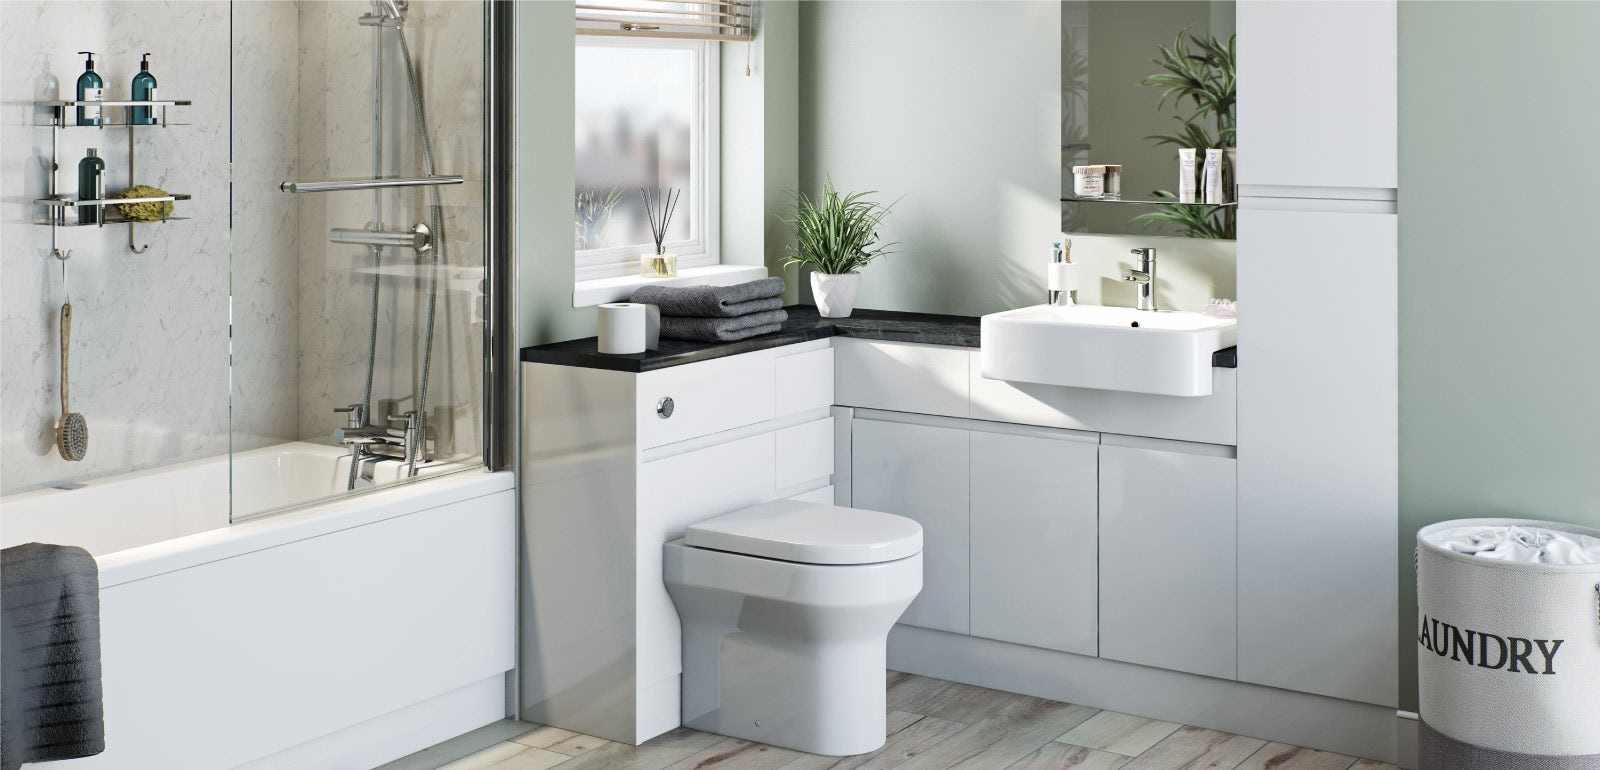 How to install fitted bathroom furniture: instructions & video